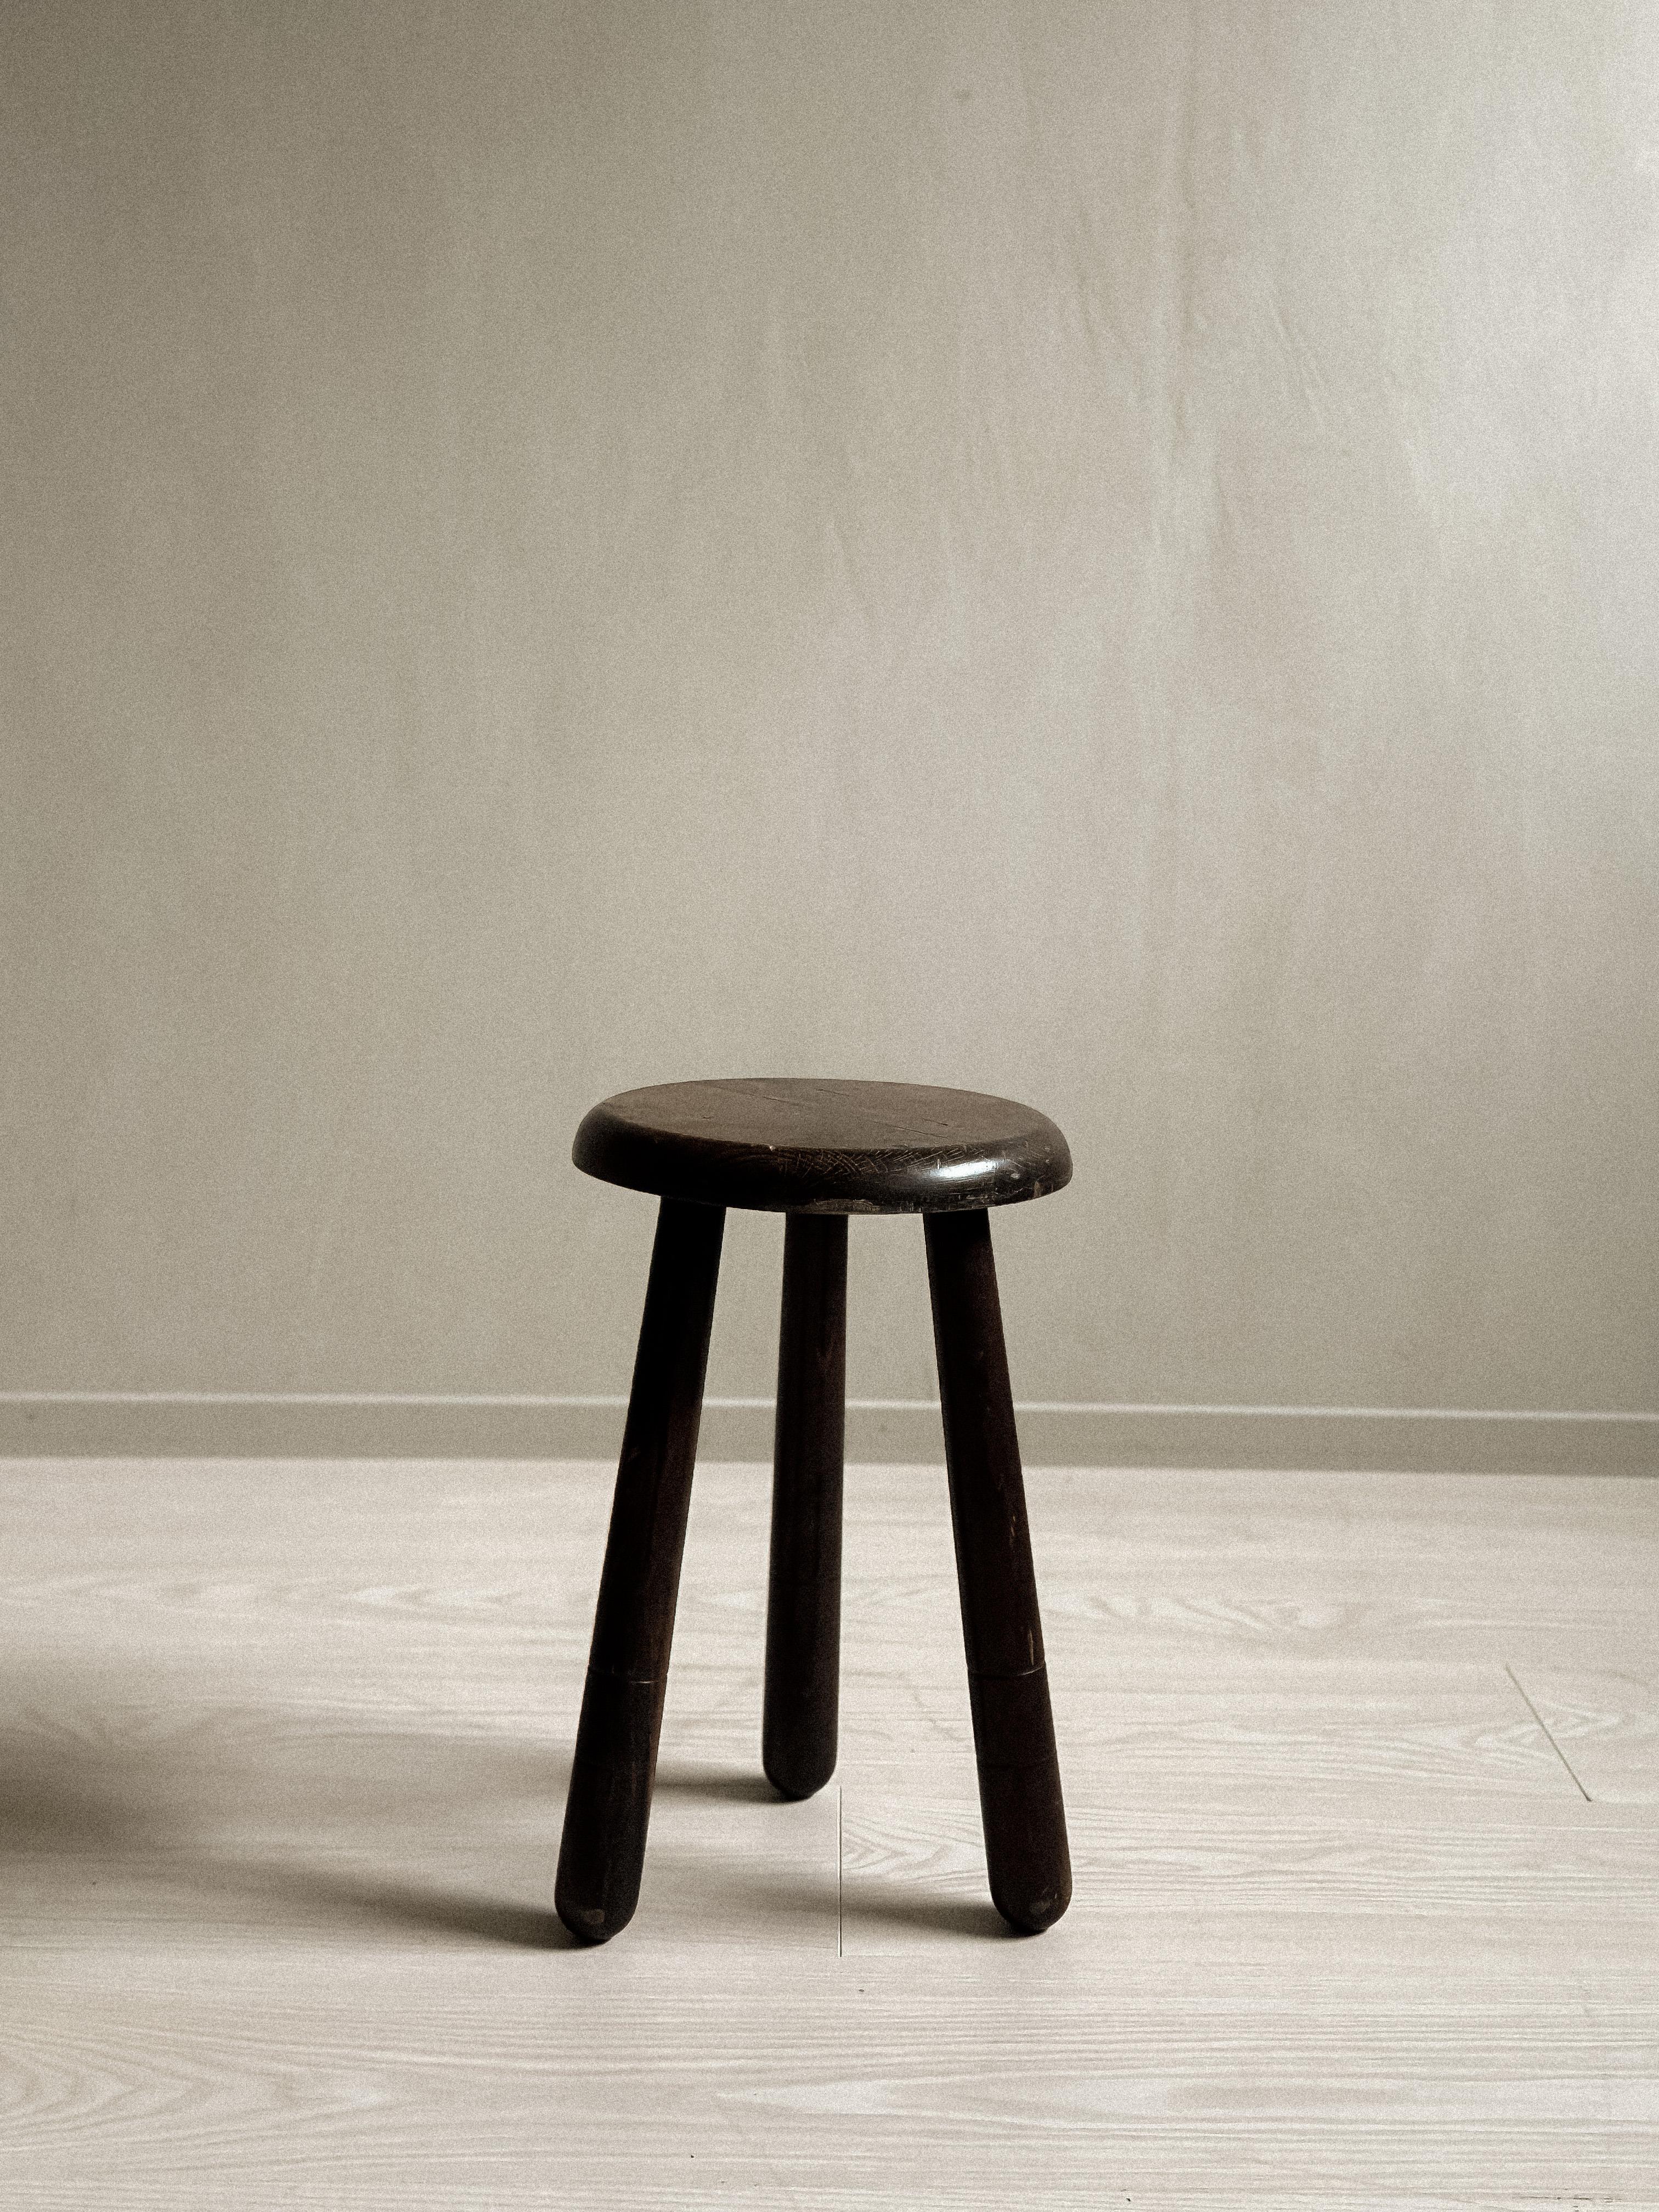 A French Mid-Century milking stool by unknown designer, France, c. 1960s. Dark stained oak with lovely patina. In good vintage conditioon with wear consitent with age and use. 